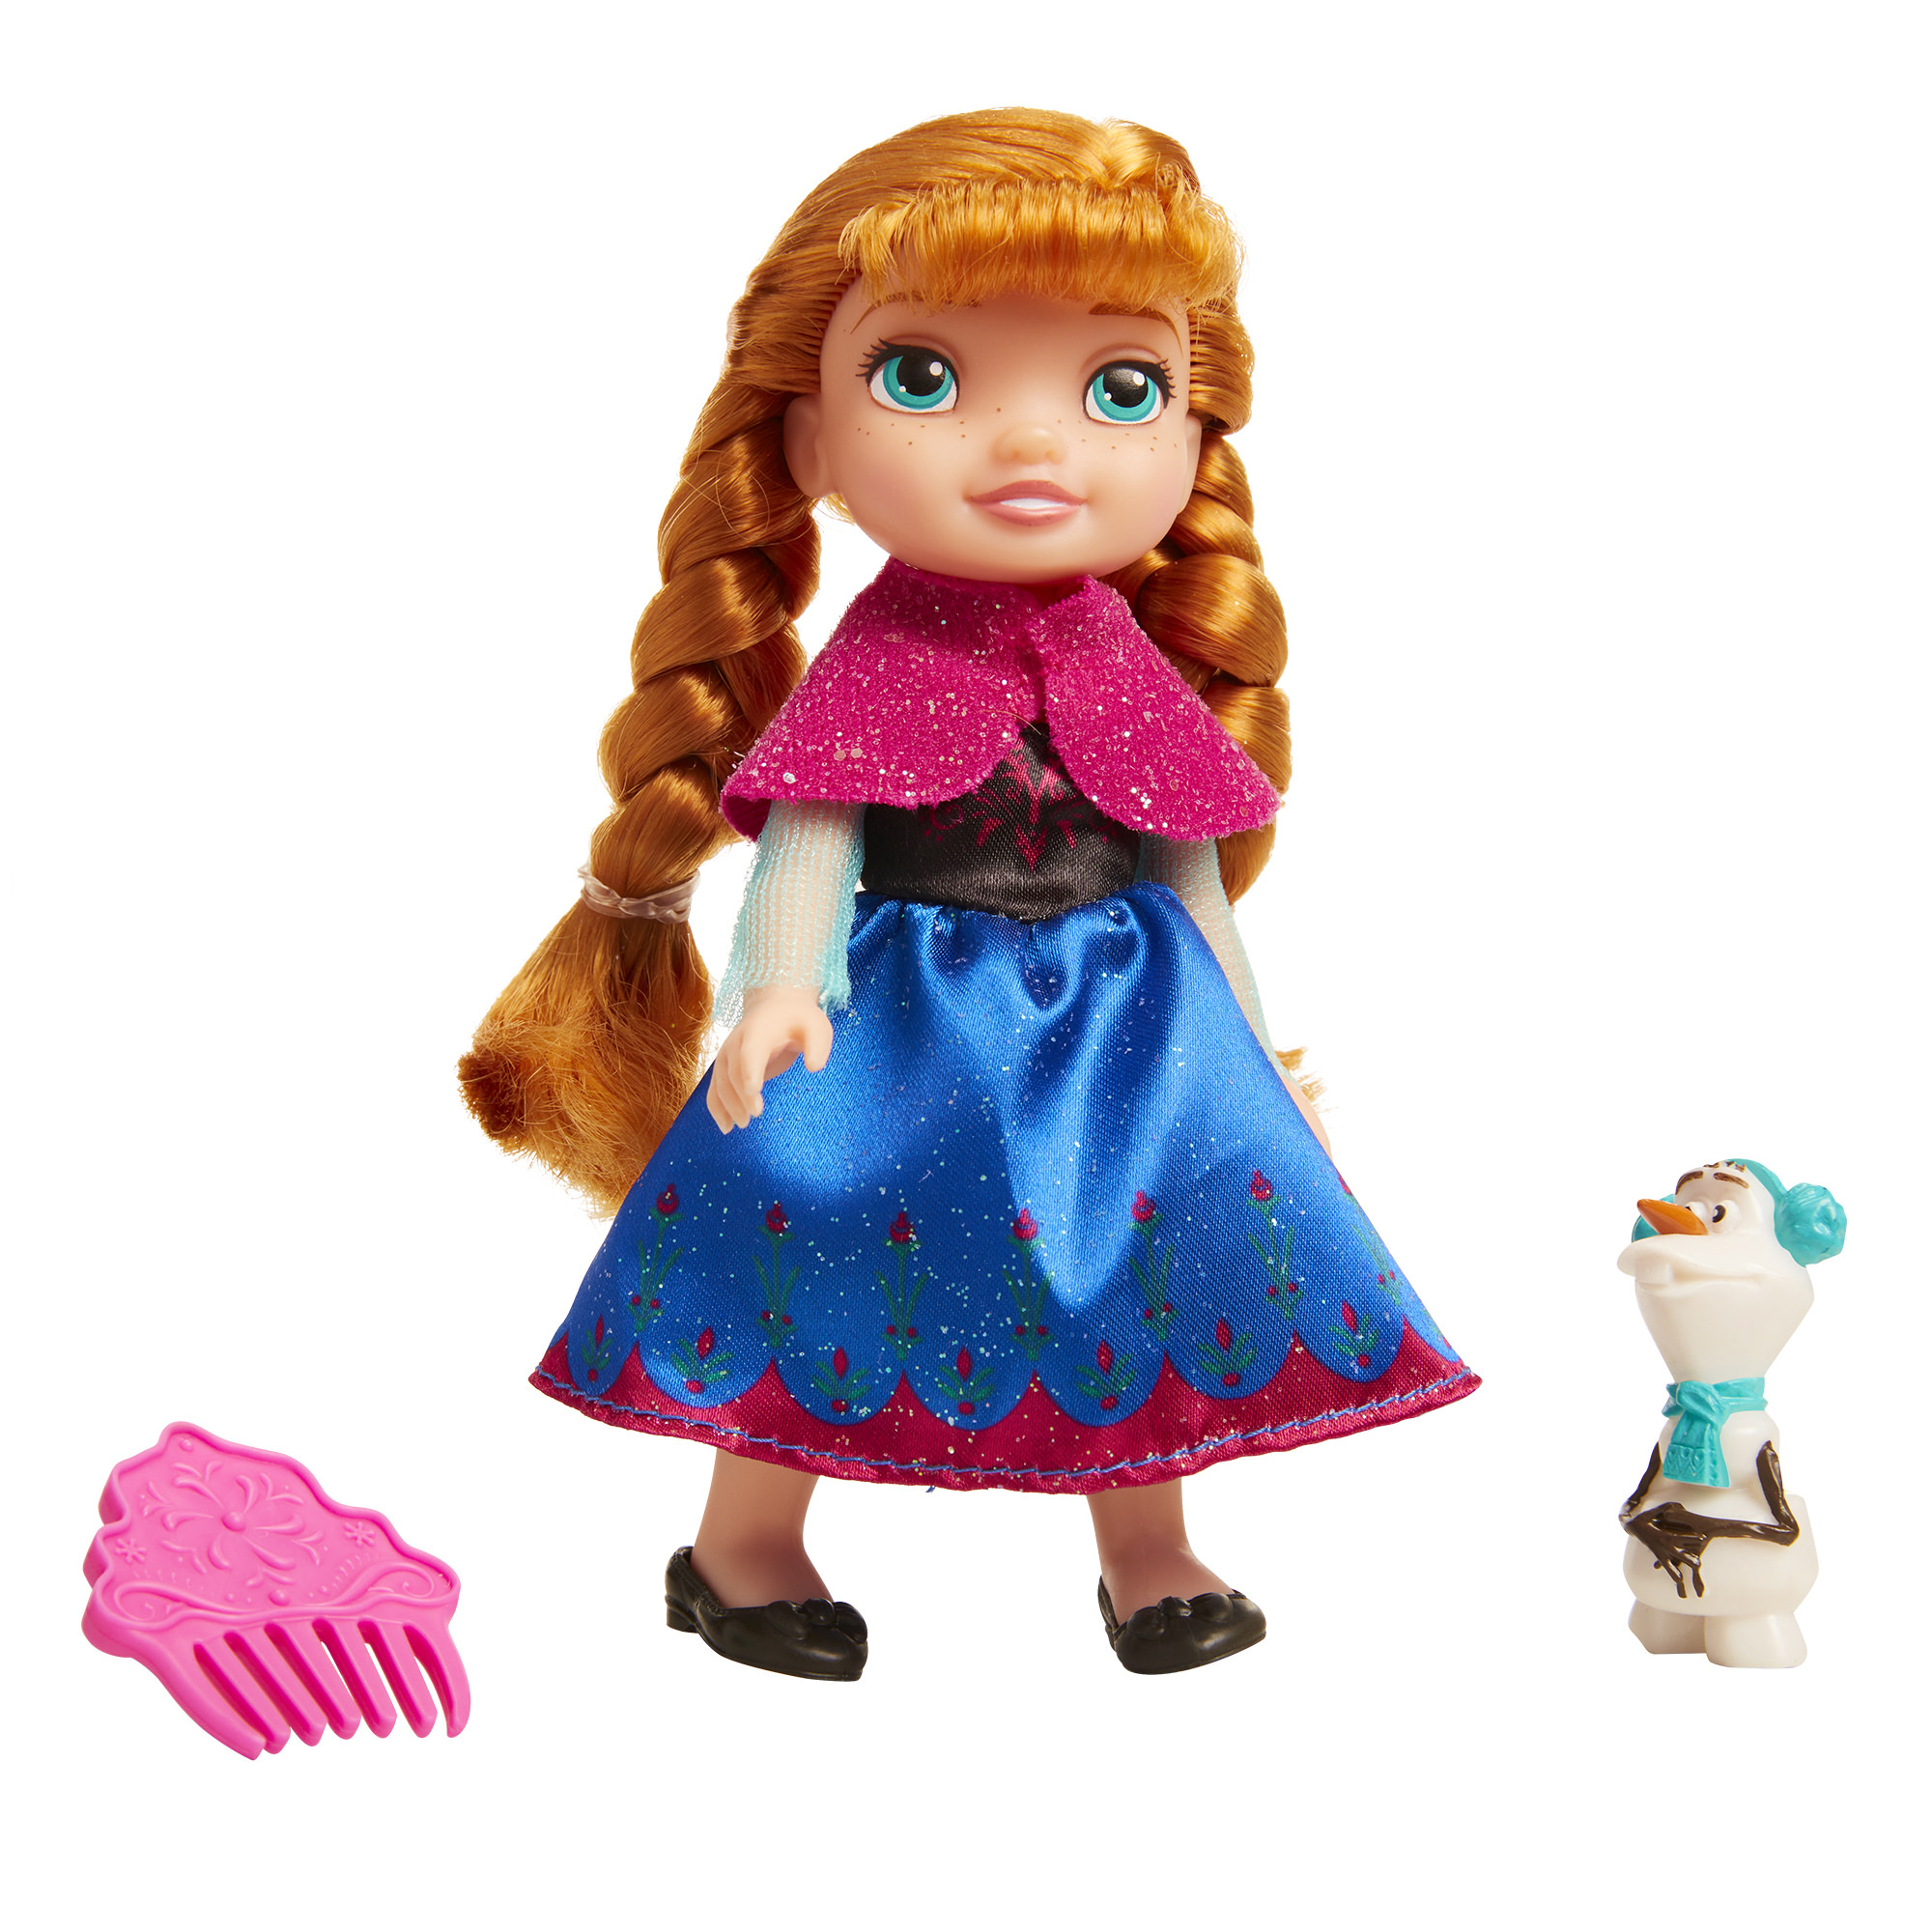 Disney Frozen Petite Anna Doll with Olaf - image 1 of 6